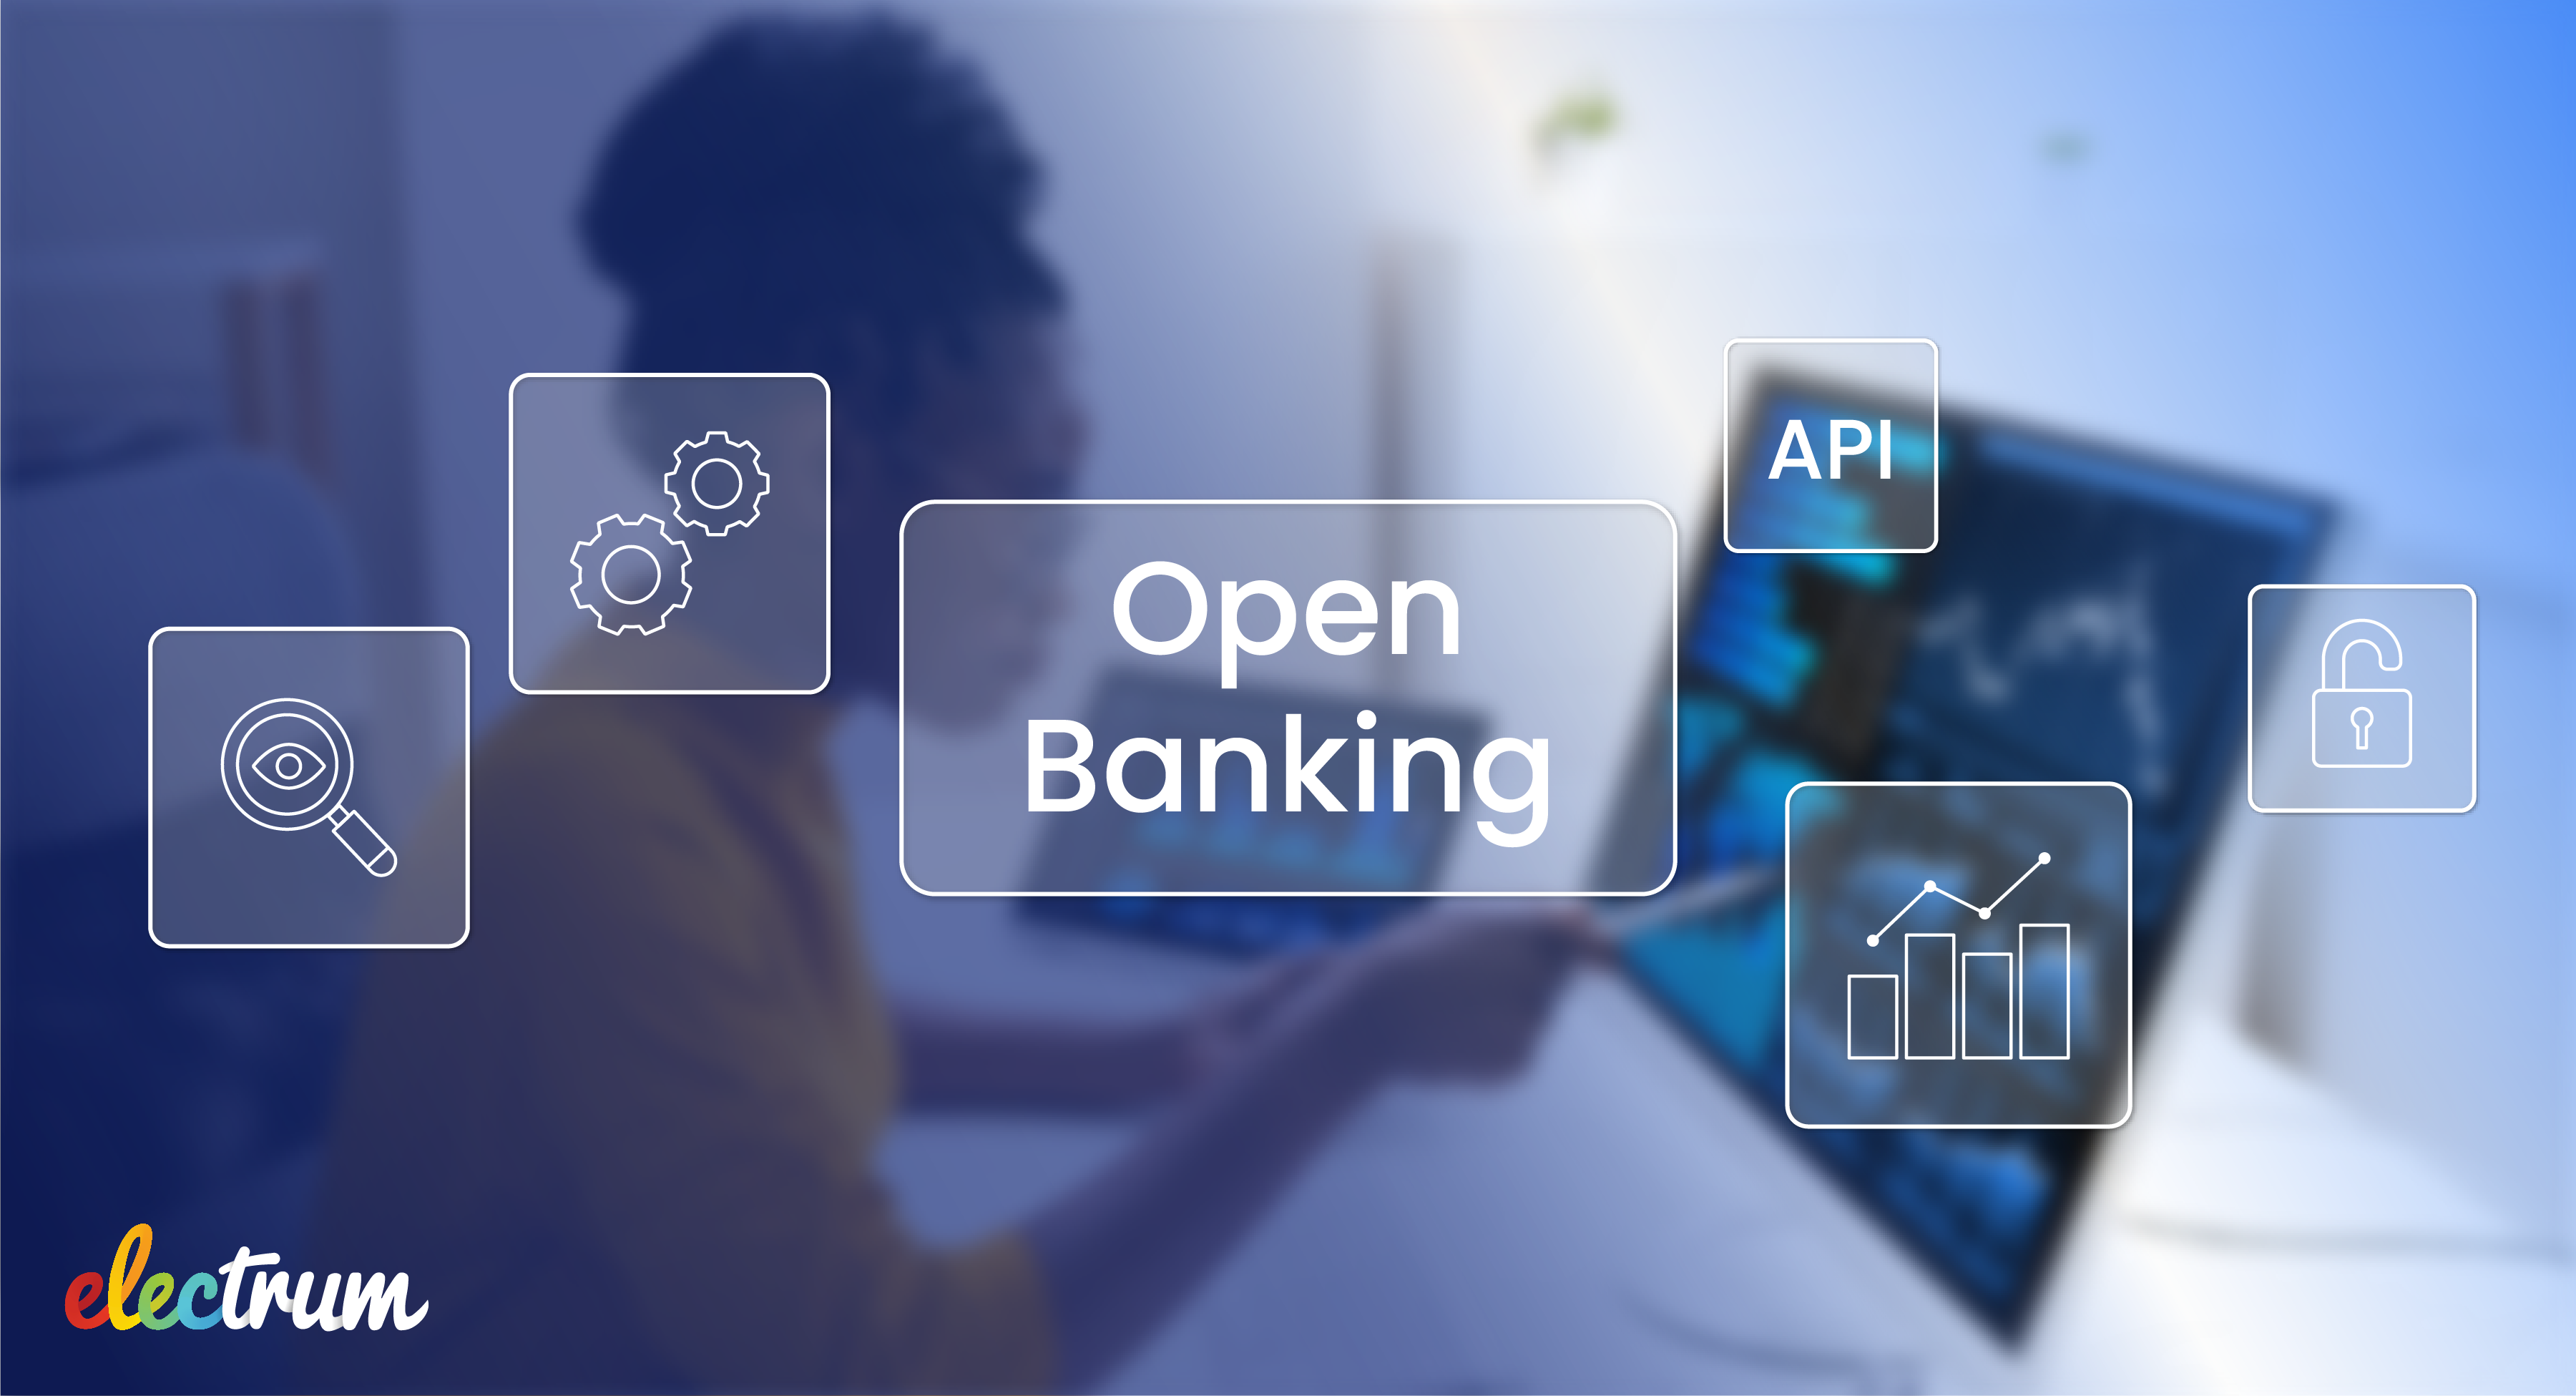 Shaping Consumer Experience through APIs and Open Banking